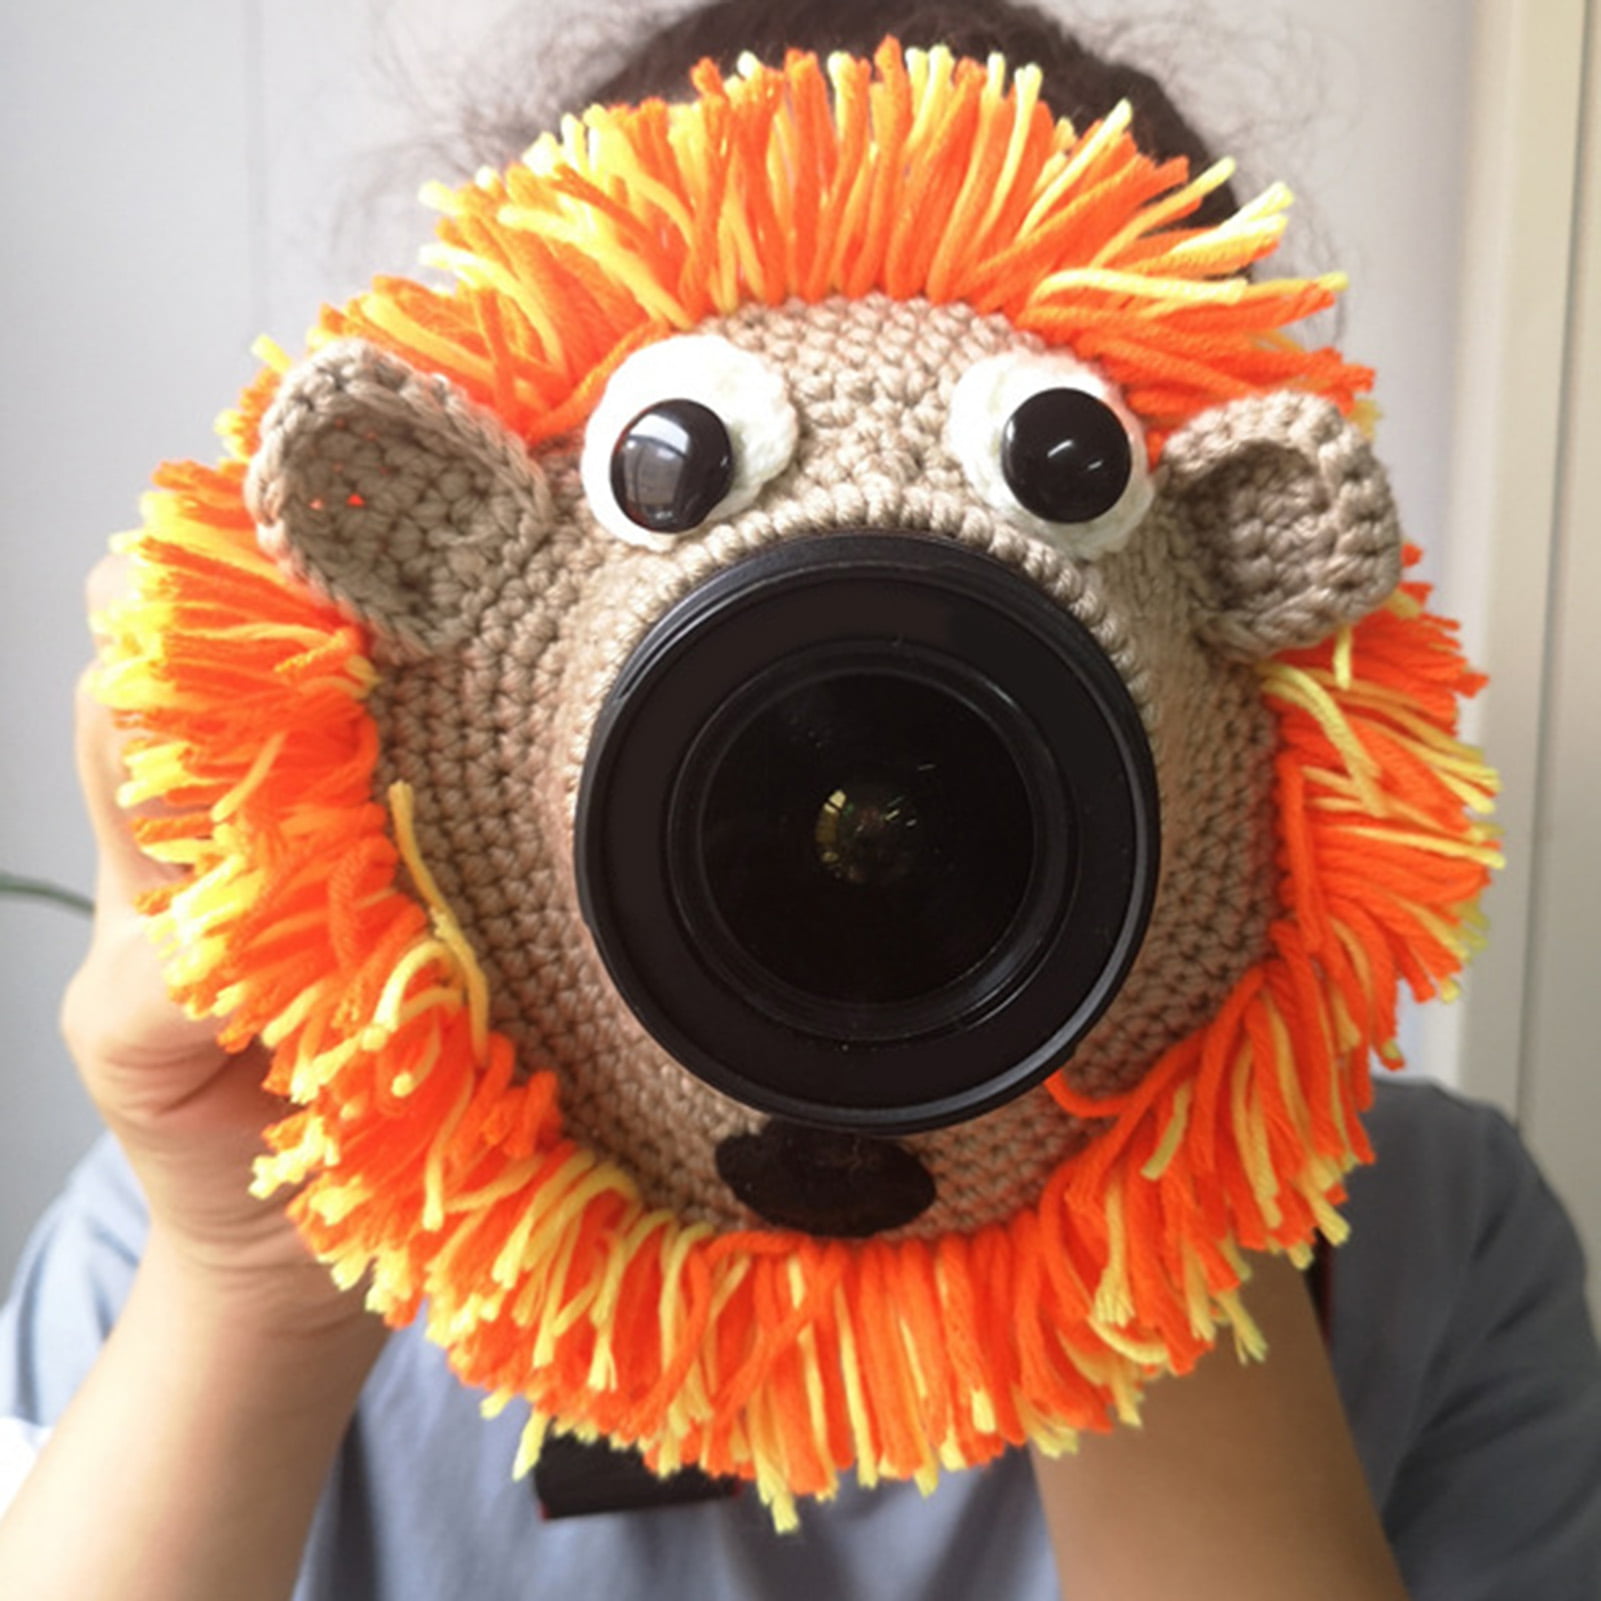 Travelwant Shutter Huggers,Animal Shutter Hugger,Stuffed Animal,Cute Animal  Lens Accessory Teaser Toy,Photography Props, Camera Buddies Posing Prop for  Portable Video Devices 